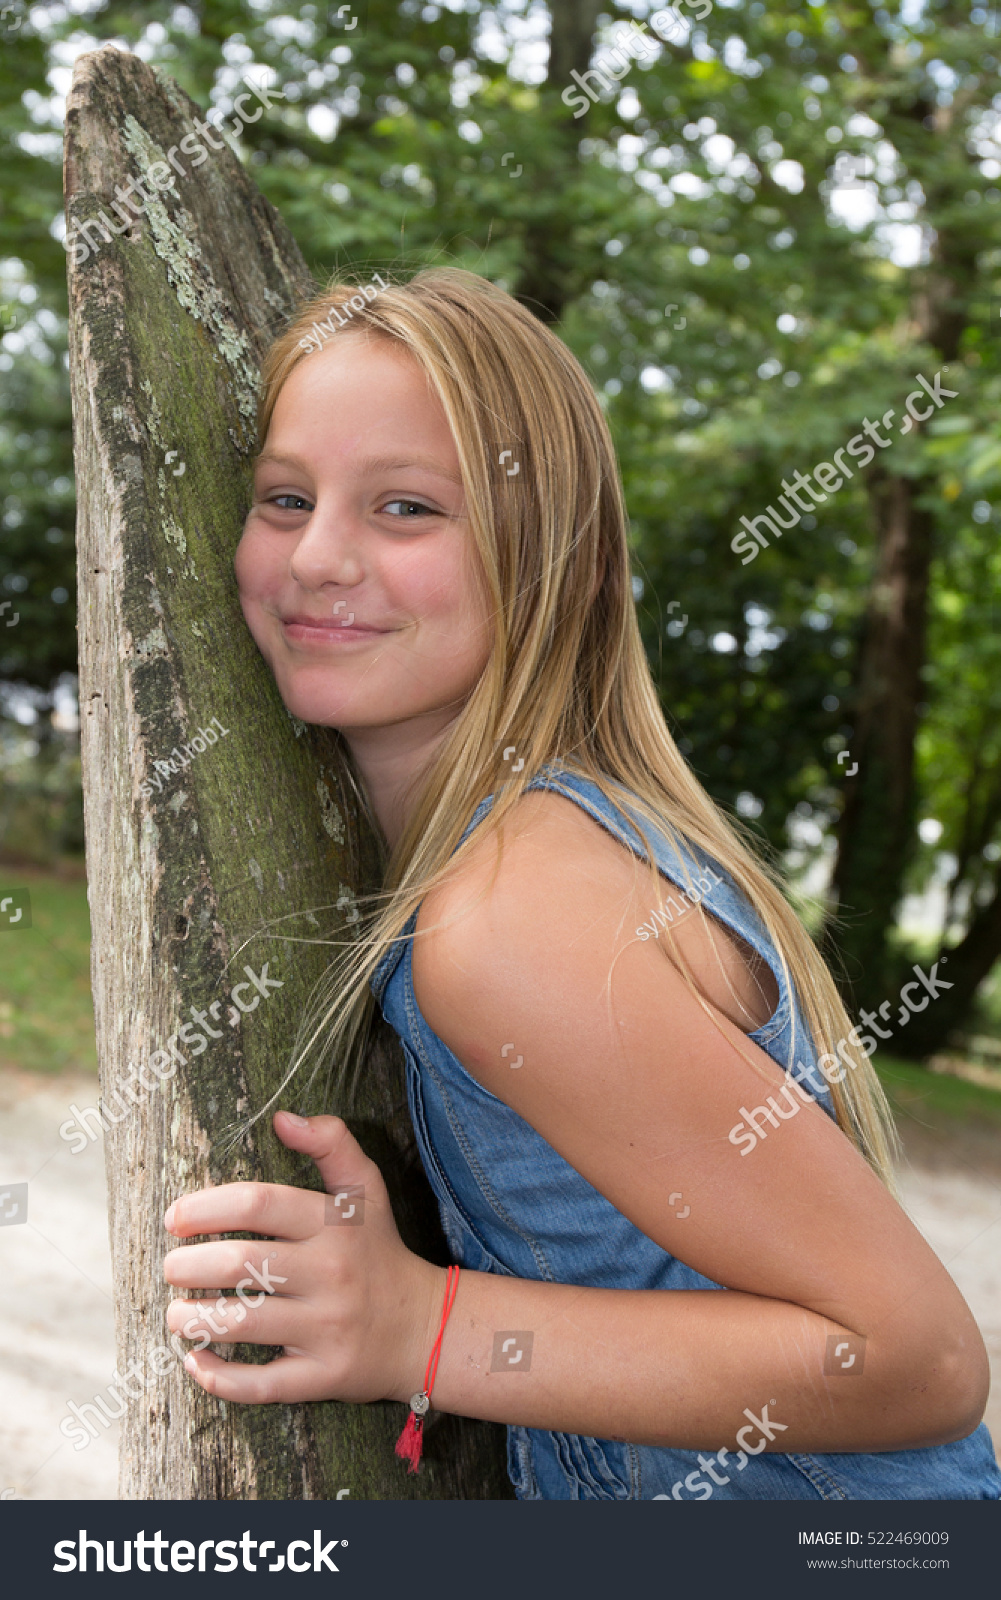 Little Preteen Girl Outdoor In Park At Summer Stock Photo 522469009 ...